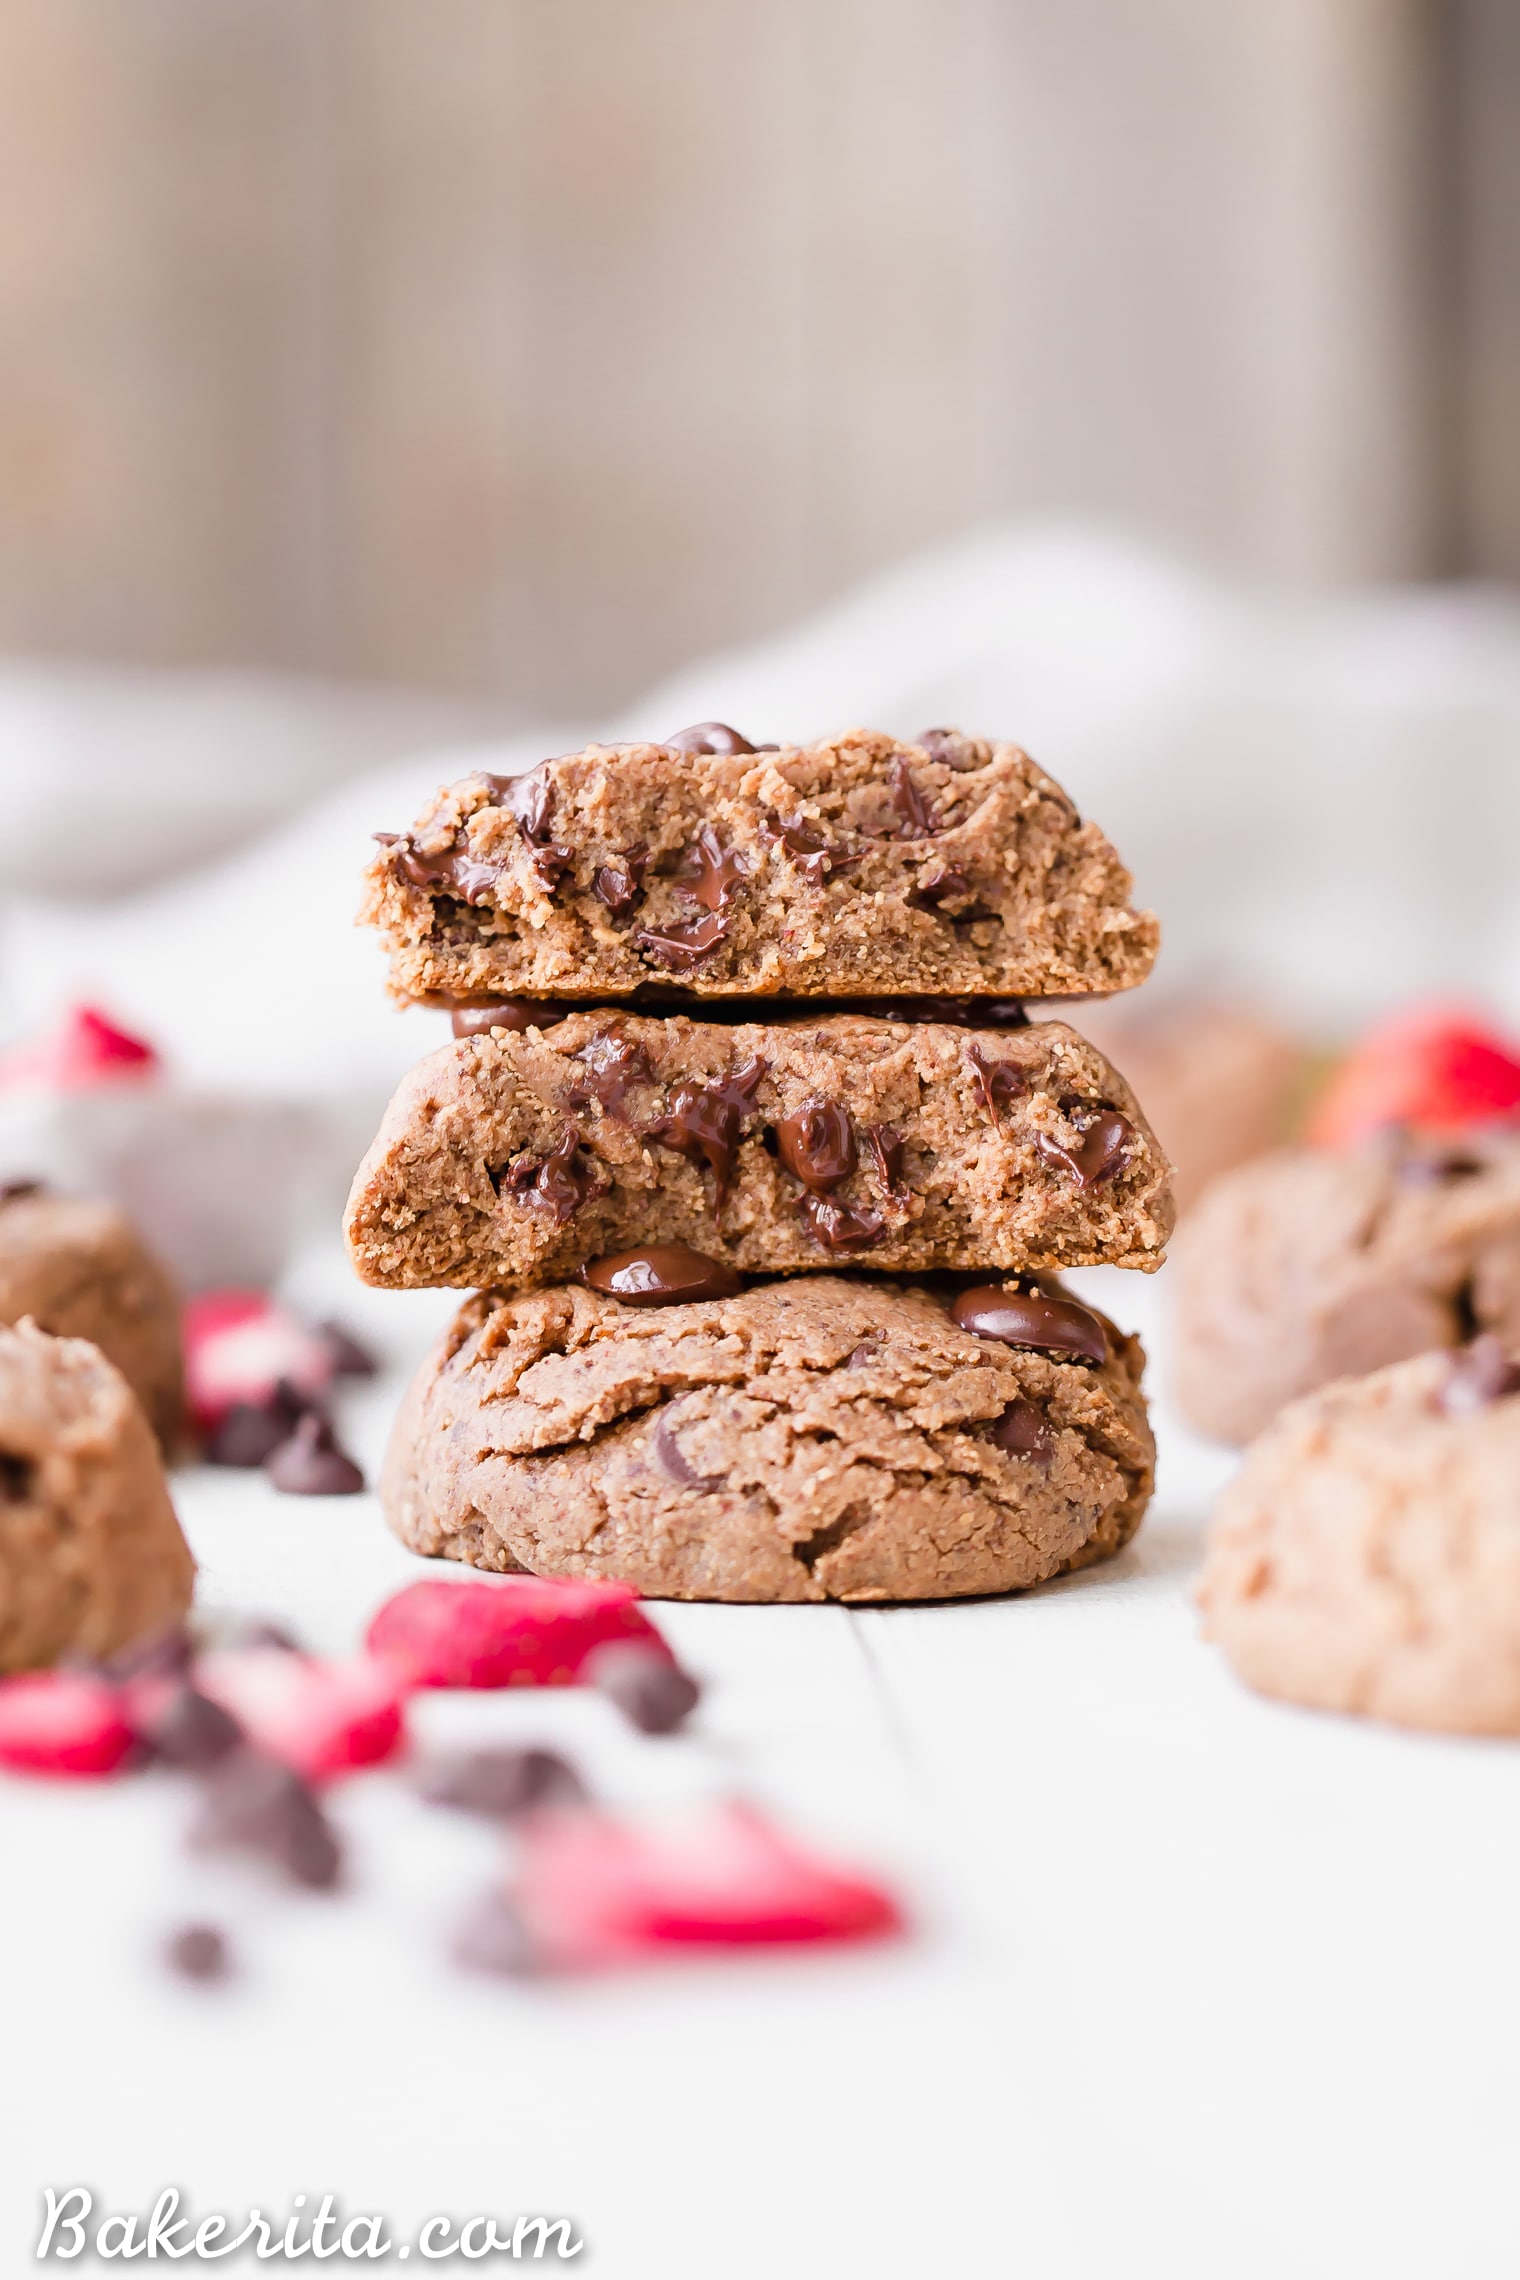 These Flourless Strawberry Chocolate Chip Cookies are thick, gooey and SO delicious, with a fruity strawberry flavor and melty chocolate chips. They're gluten-free, paleo, and vegan, and made with just six ingredients!